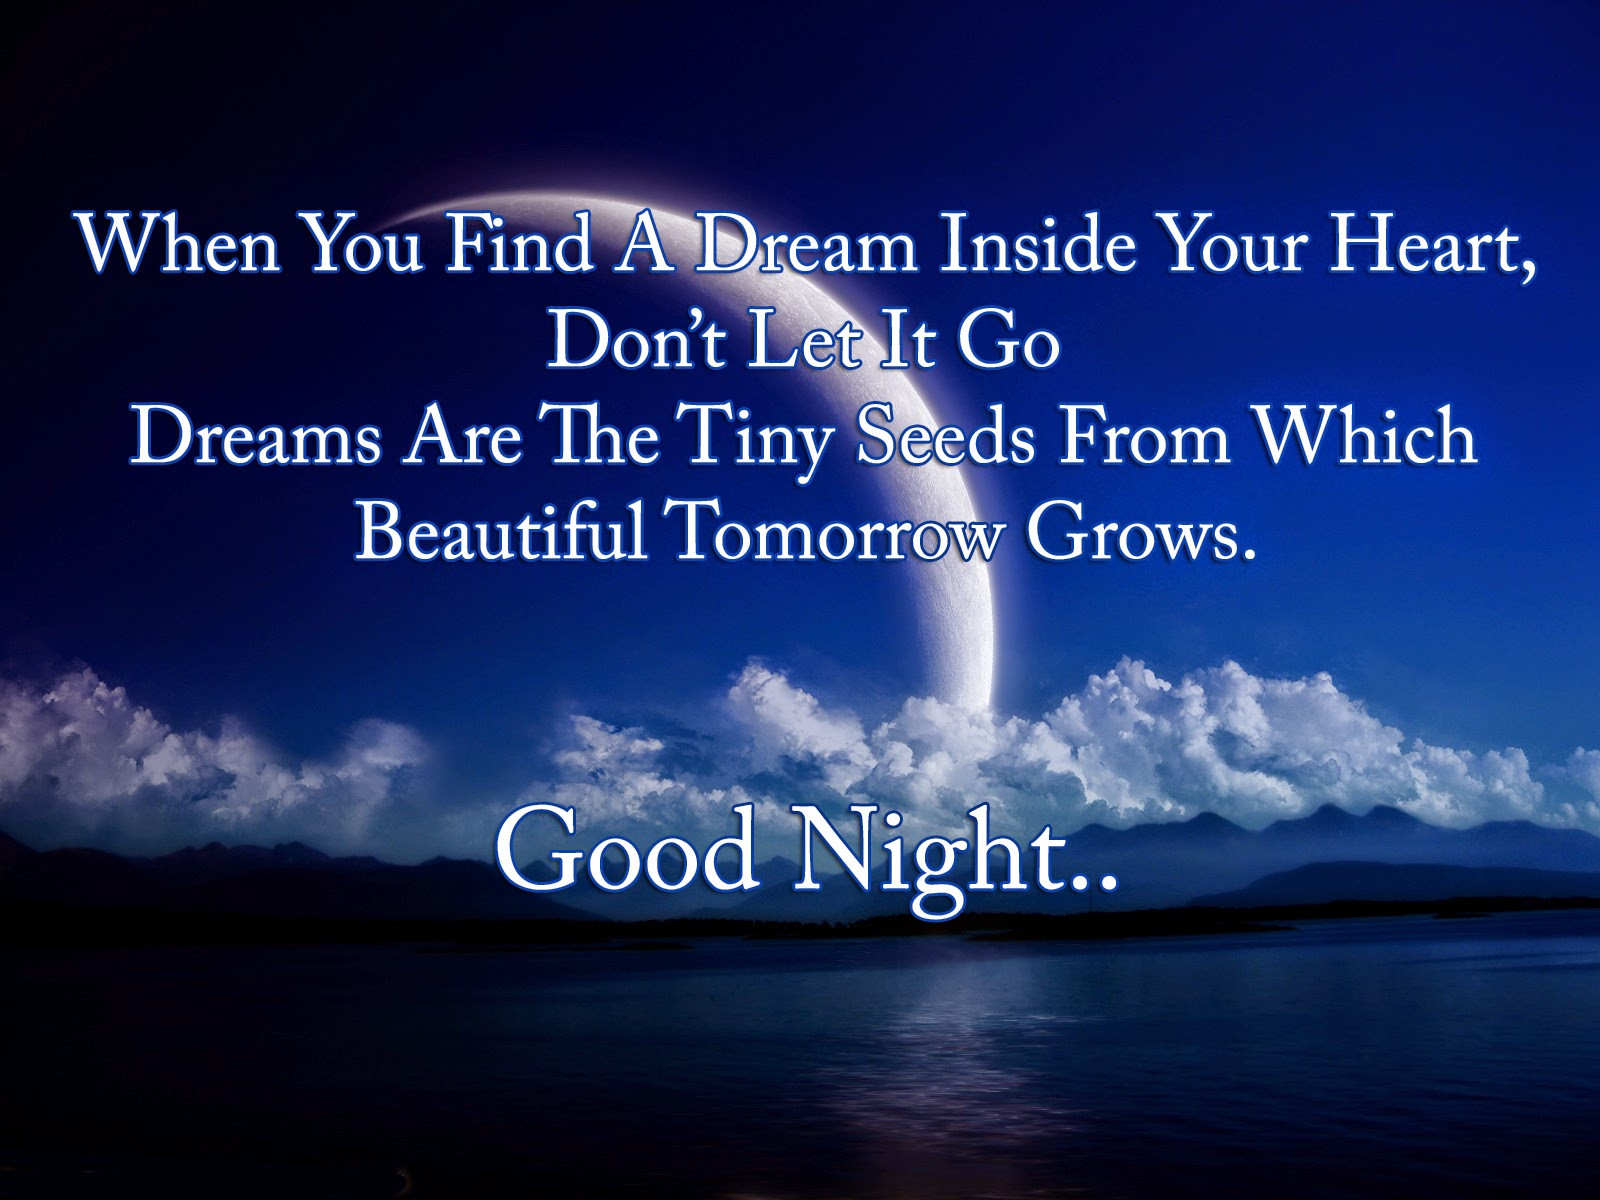 Goodnight Romantic Quotes
 famous good night love quotes greeting photos This Blog